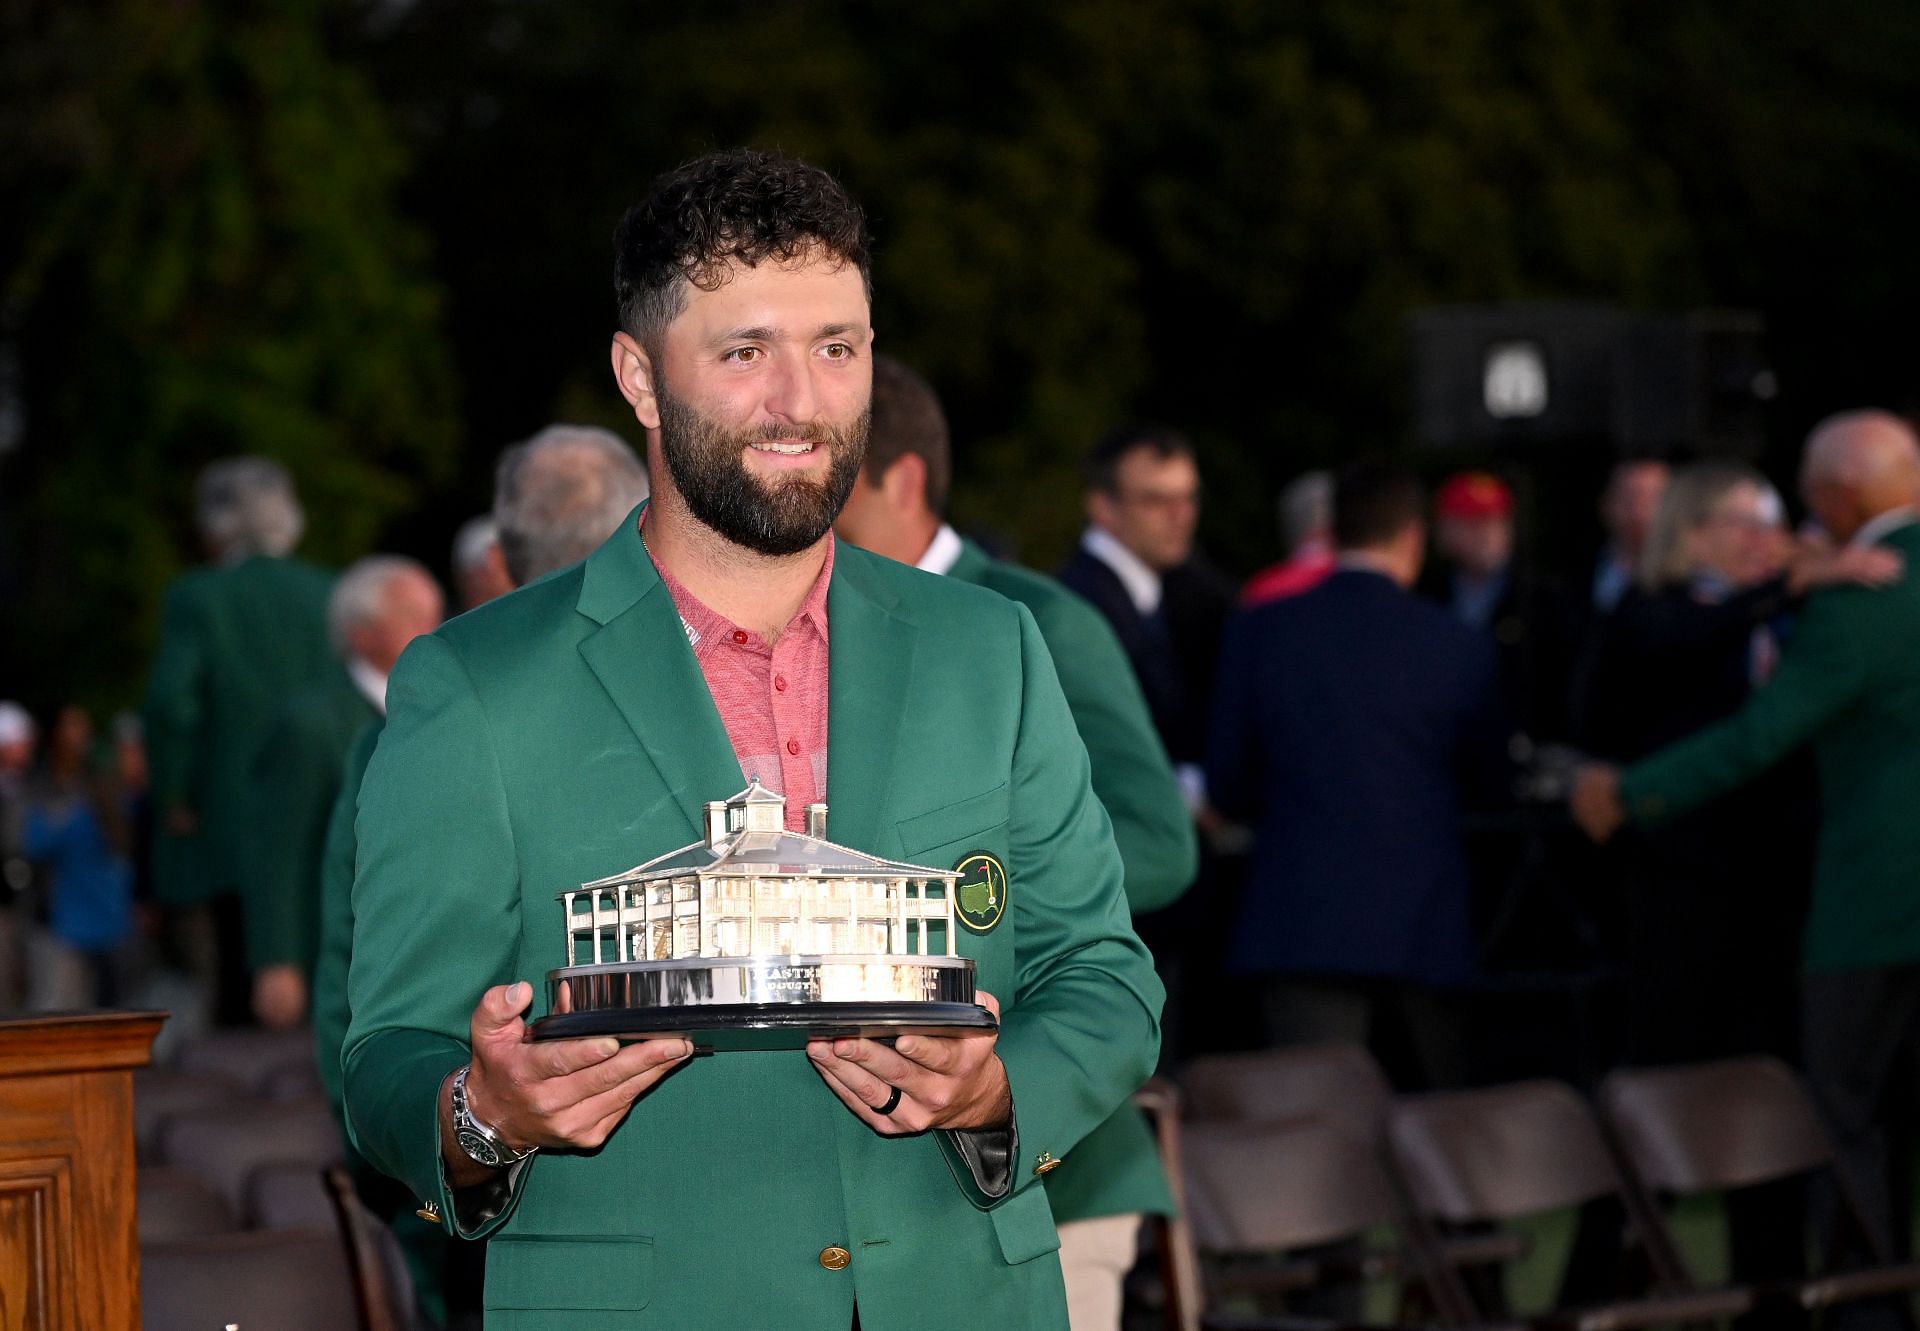 Jon Rahm wearing the prestigious green jacket and holding the Masters trophy, 2023 (via Getty Images)